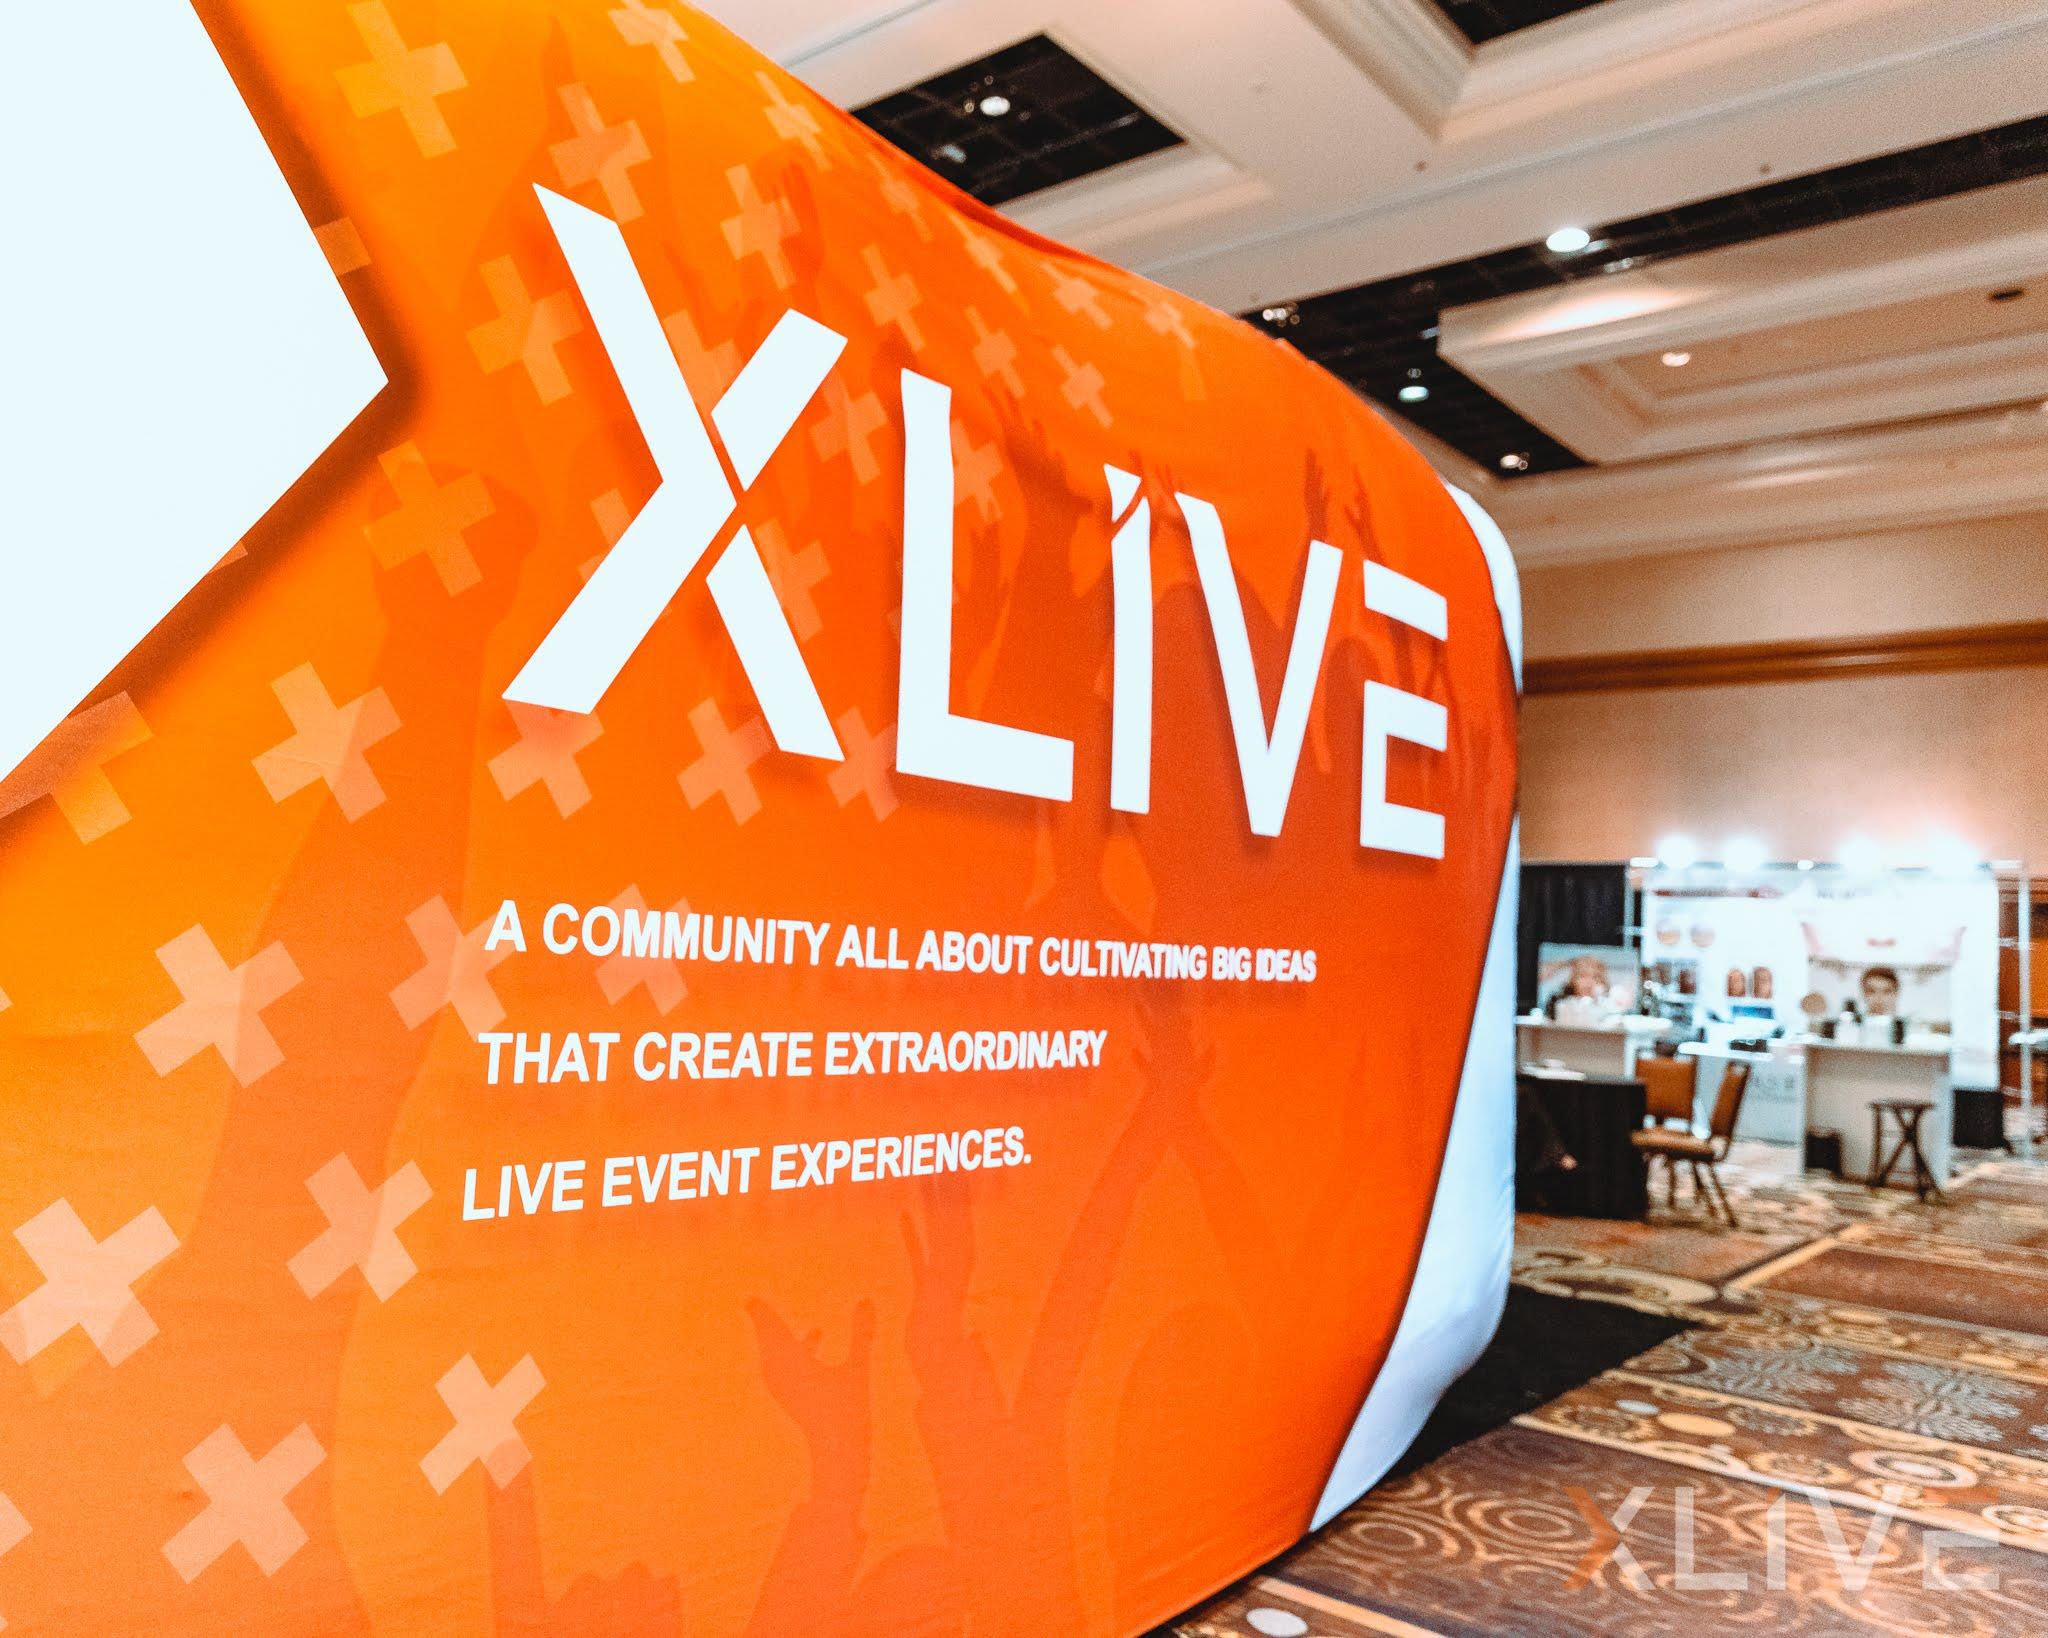 XLIVE Conference 2018